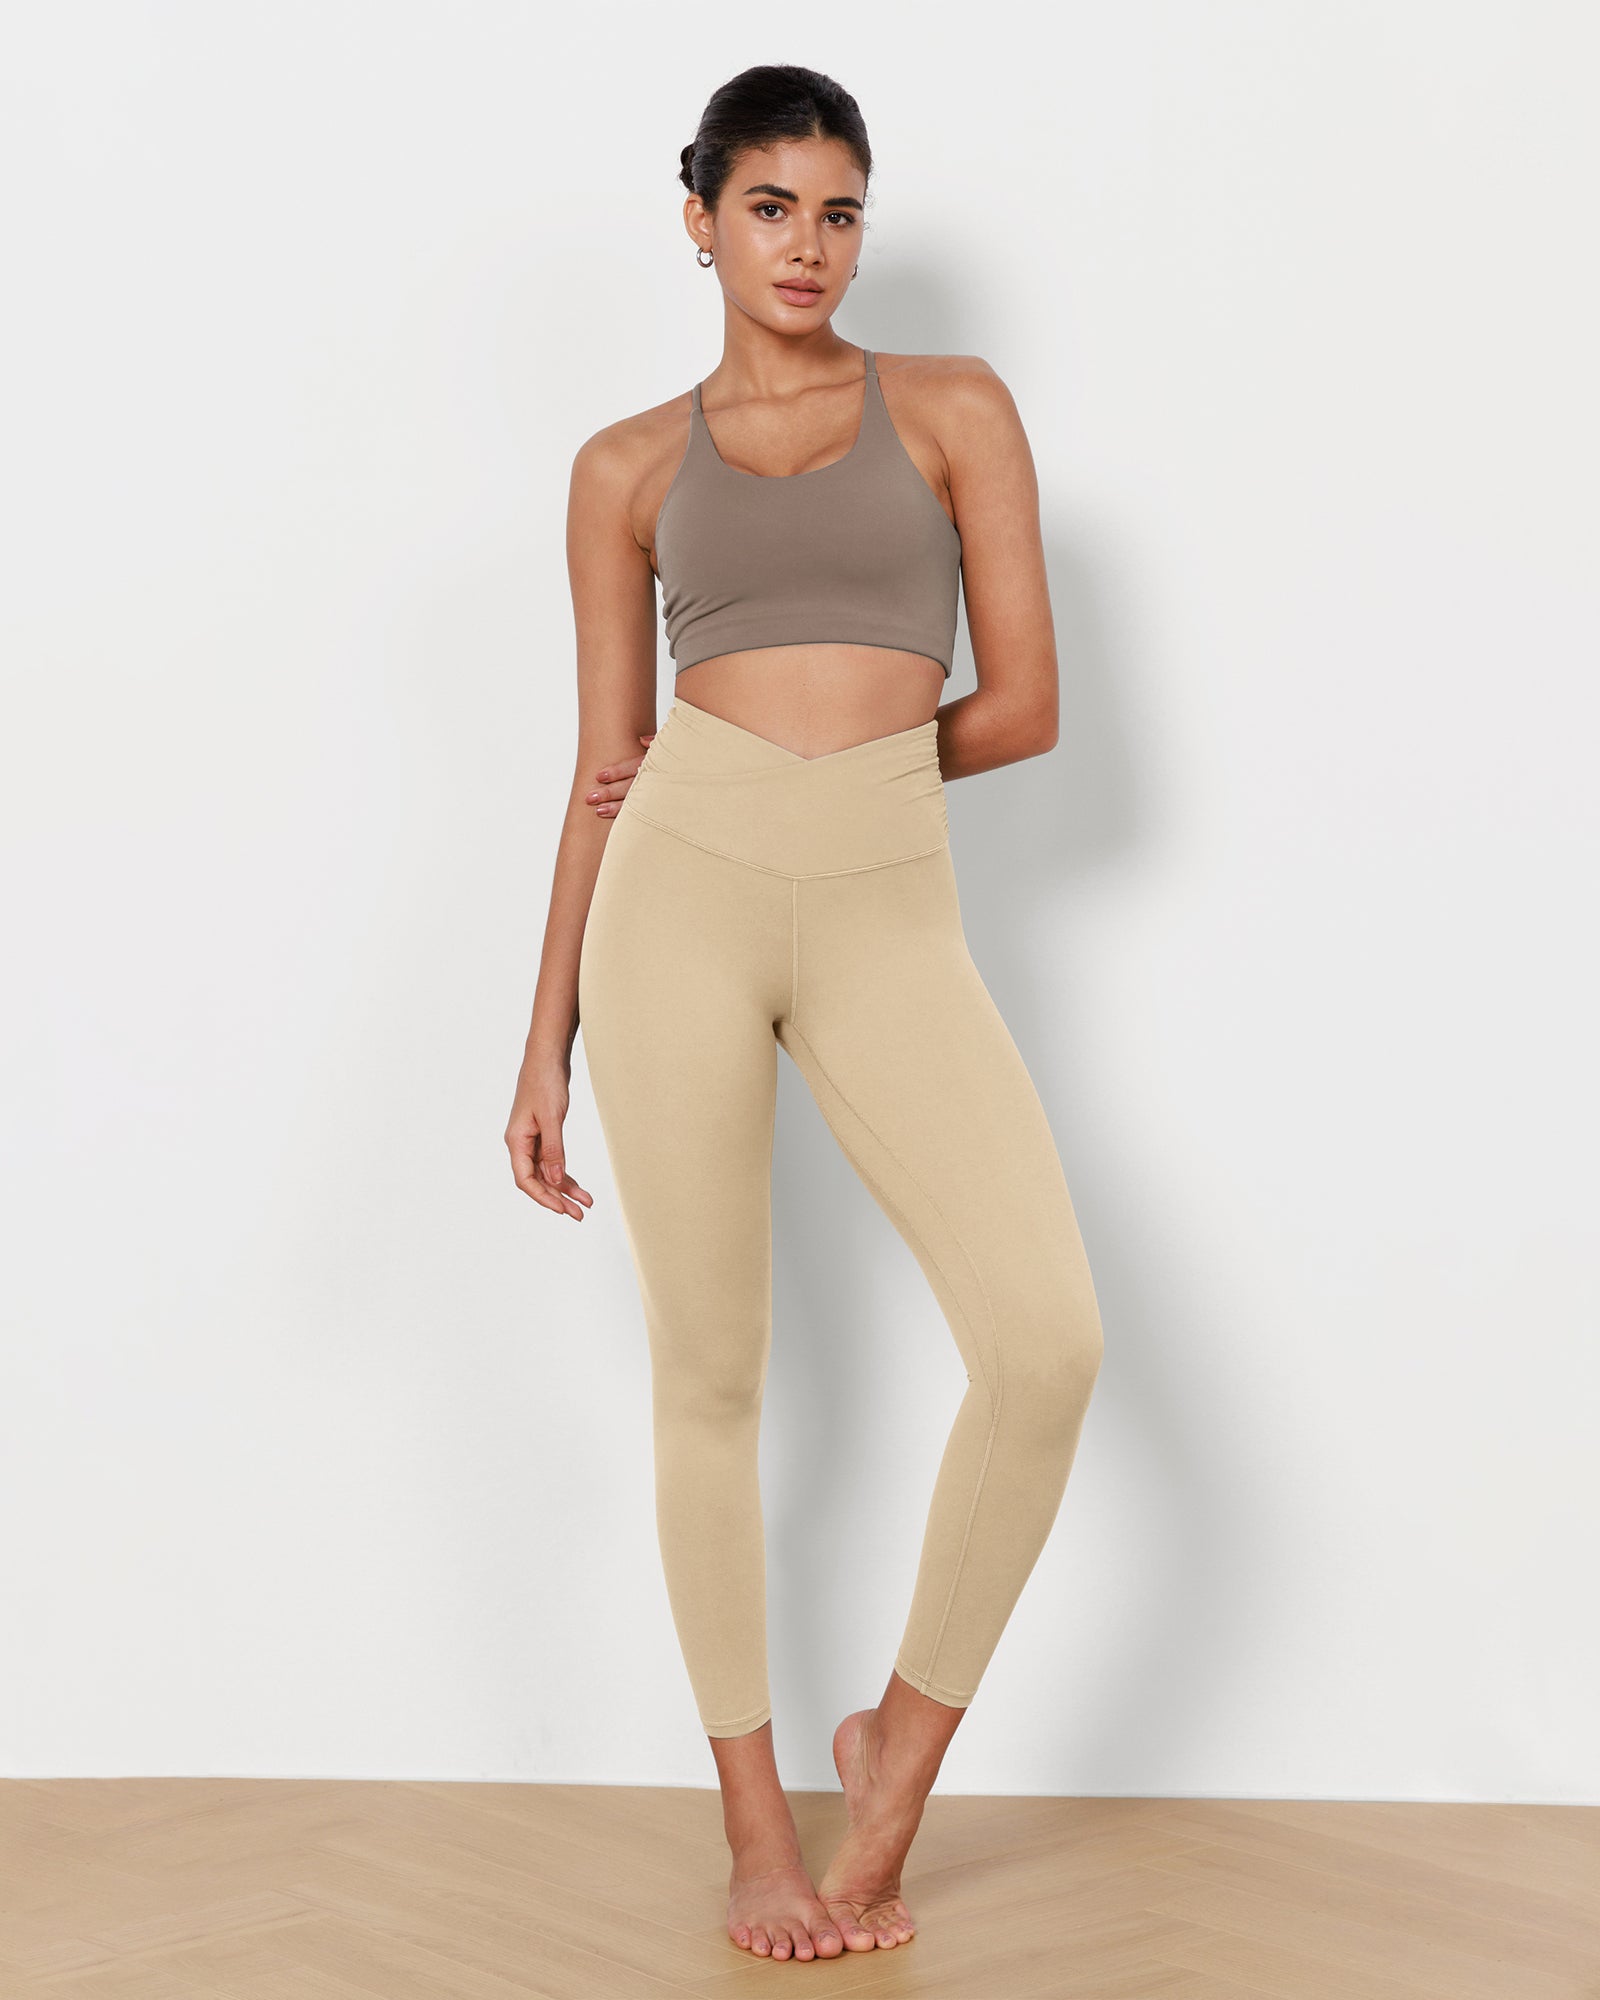 7/8 High-Waist Checkpoint Leggings – The Gold Parrot